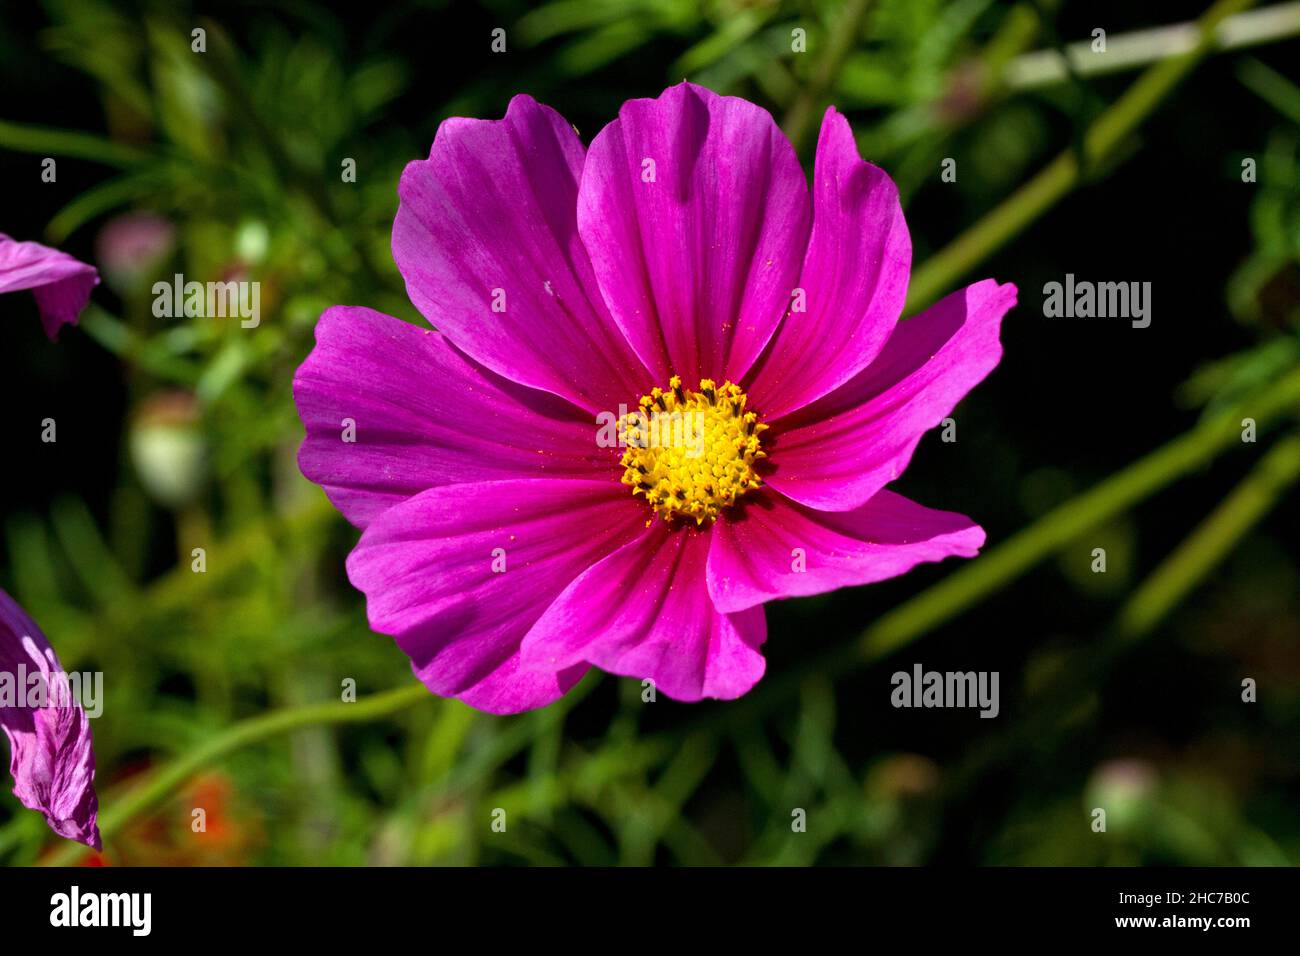 A single purple cosmos flower in full bloom in a garden in Nanaimo, Vancouver Island, BC, Canada in July Stock Photo